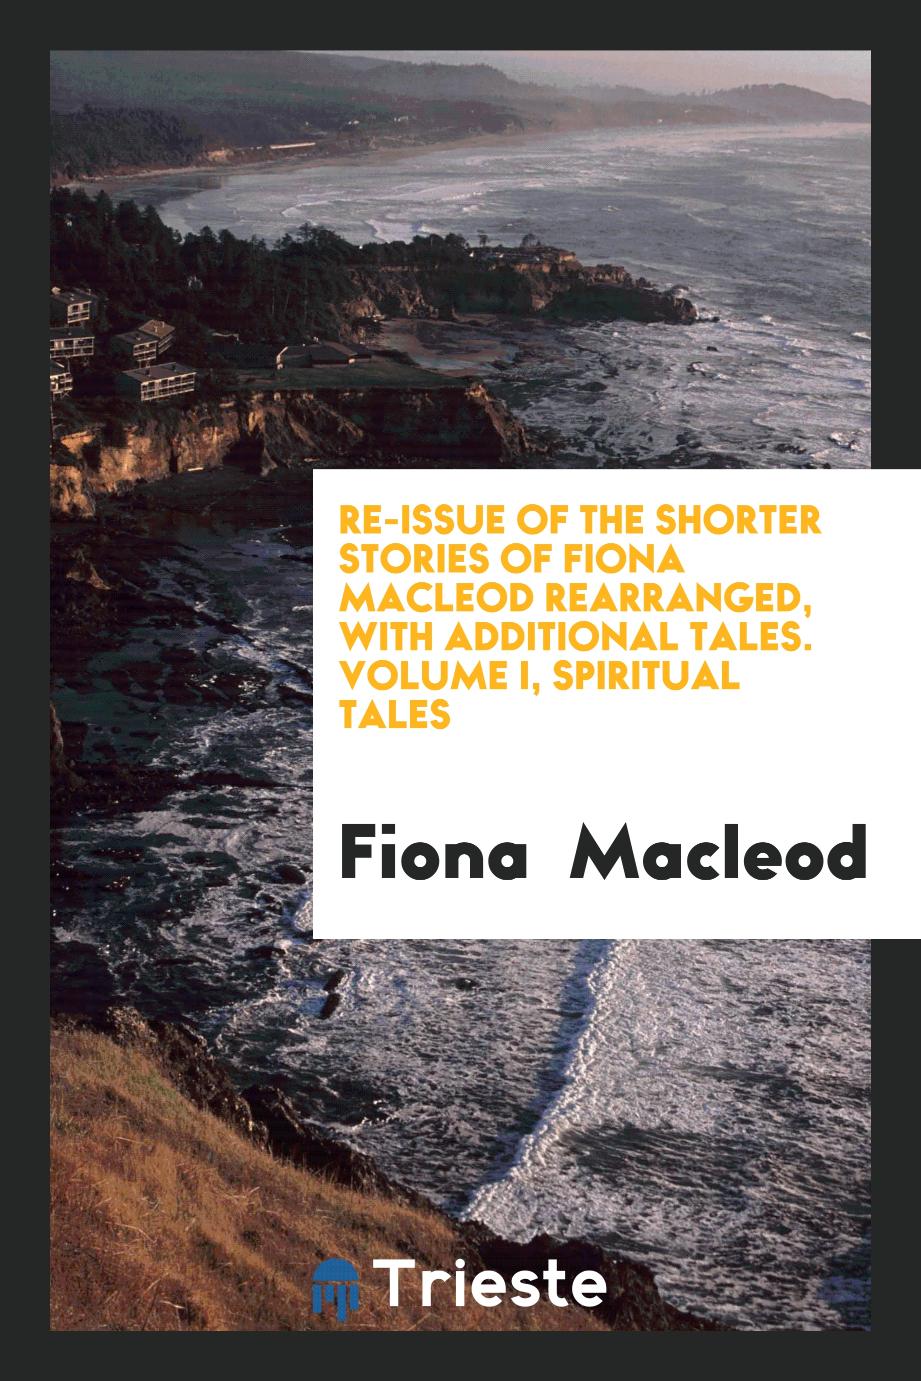 Re-issue of the shorter stories of Fiona Macleod rearranged, with additional tales. Volume I, Spiritual tales